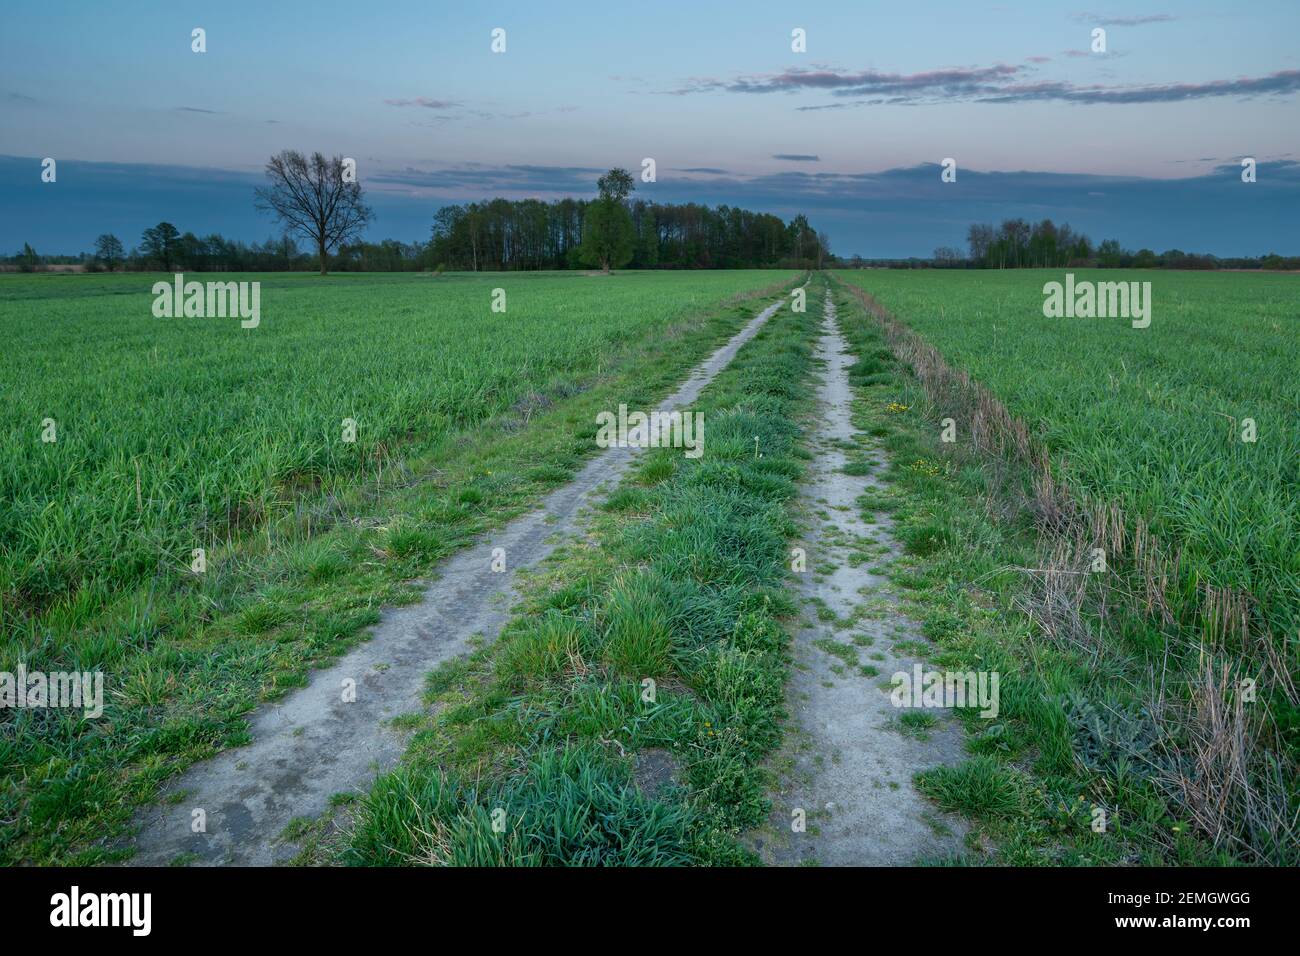 A dirt road between green fields and the evening sky, Nowiny, eastern Poland Stock Photo